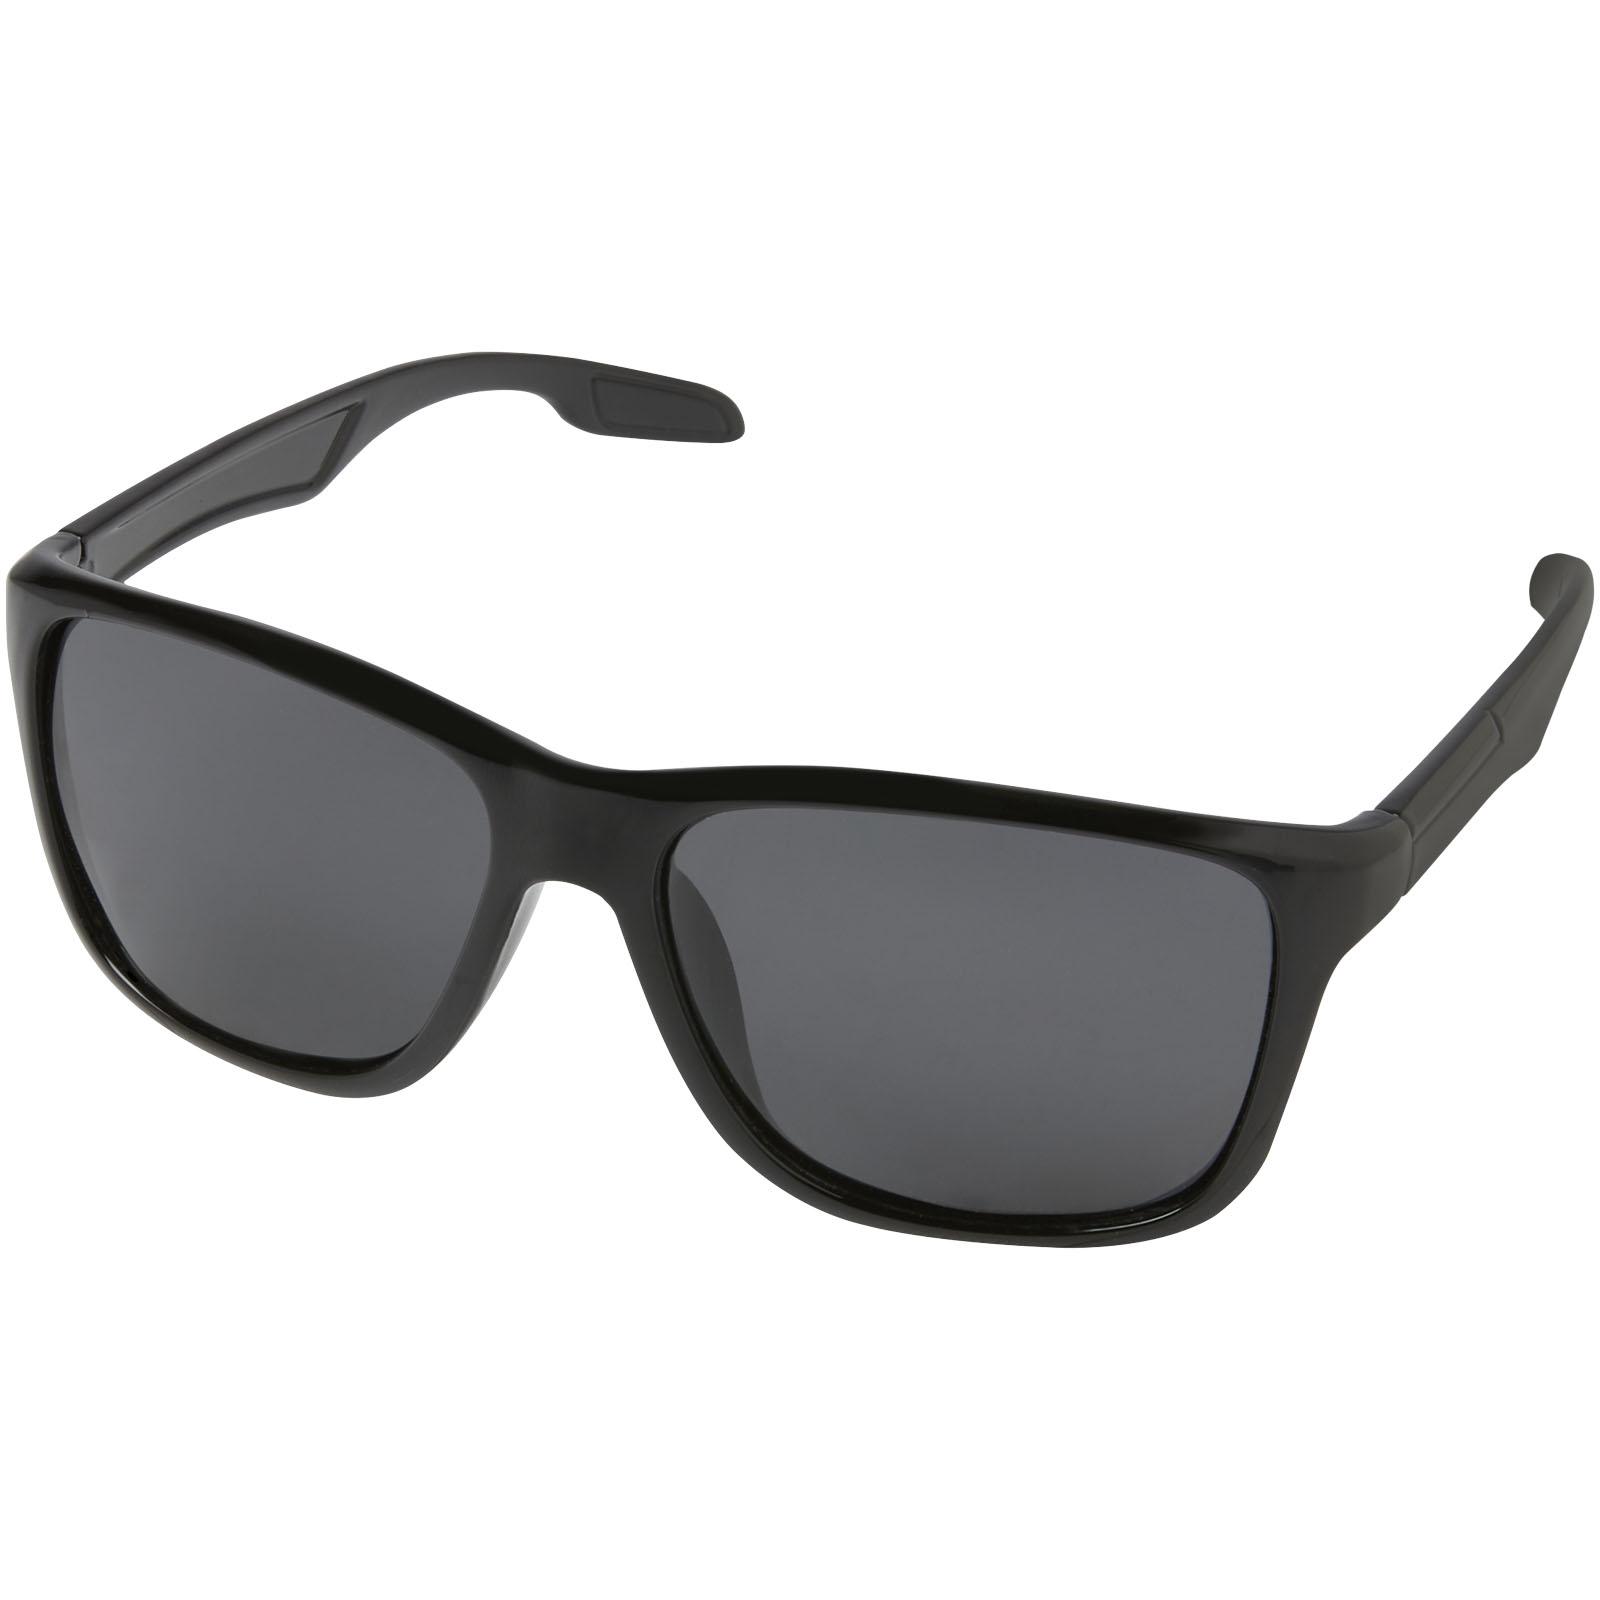 Sunglasses - Eiger polarized sunglasses in recycled PET casing